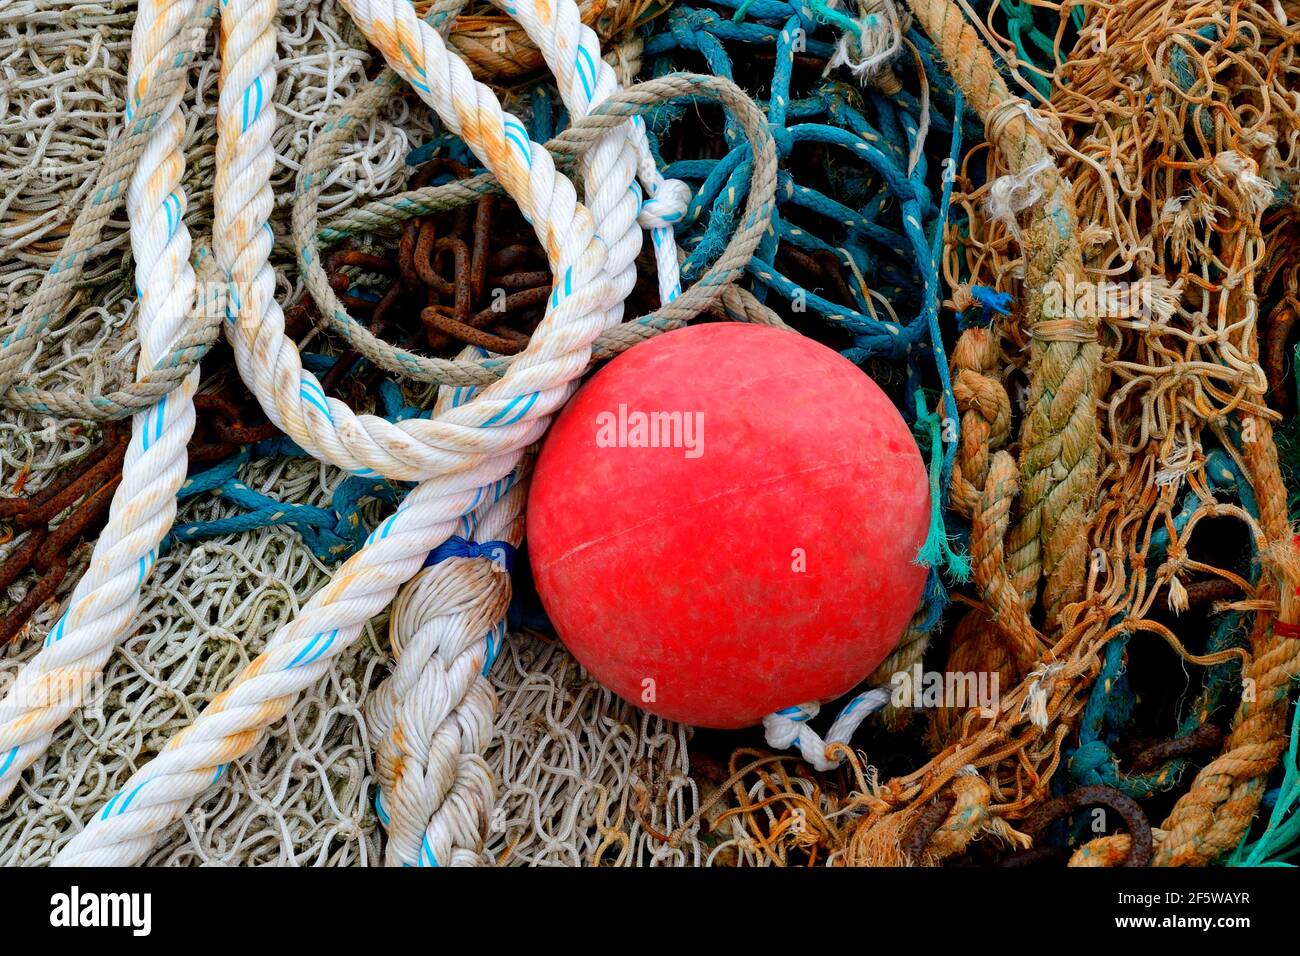 Ship ropes and fishing nets with floating ball, Honfleur, Normandy, France  Stock Photo - Alamy